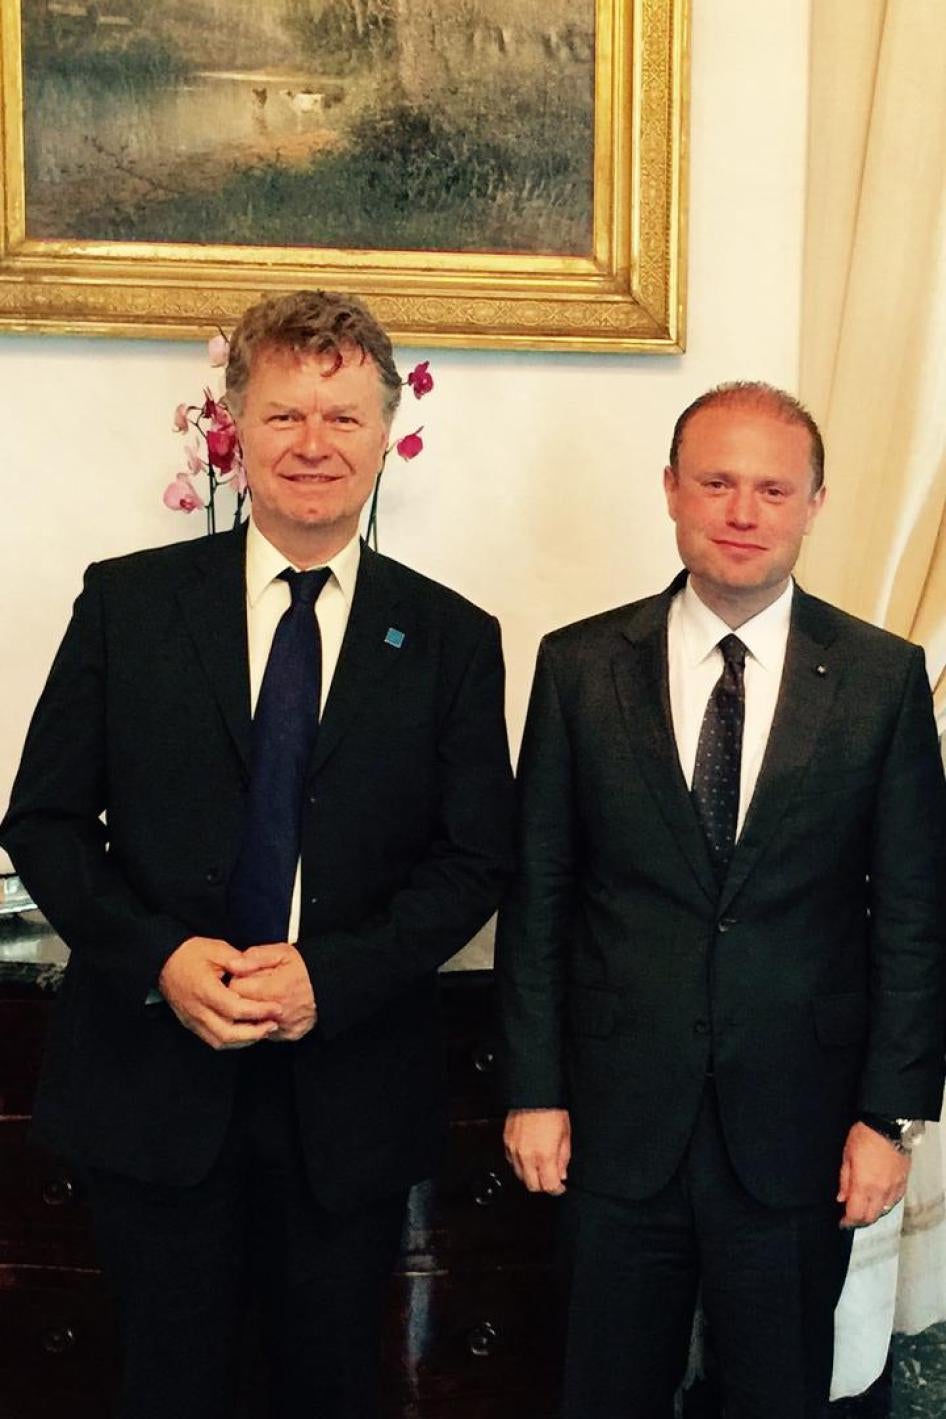 Boris Dittrich, Human Rights Watch LGBT Rights Program advocacy director, with Joseph Muscat, Prime Minister of Malta, in Malta in June 2017. 